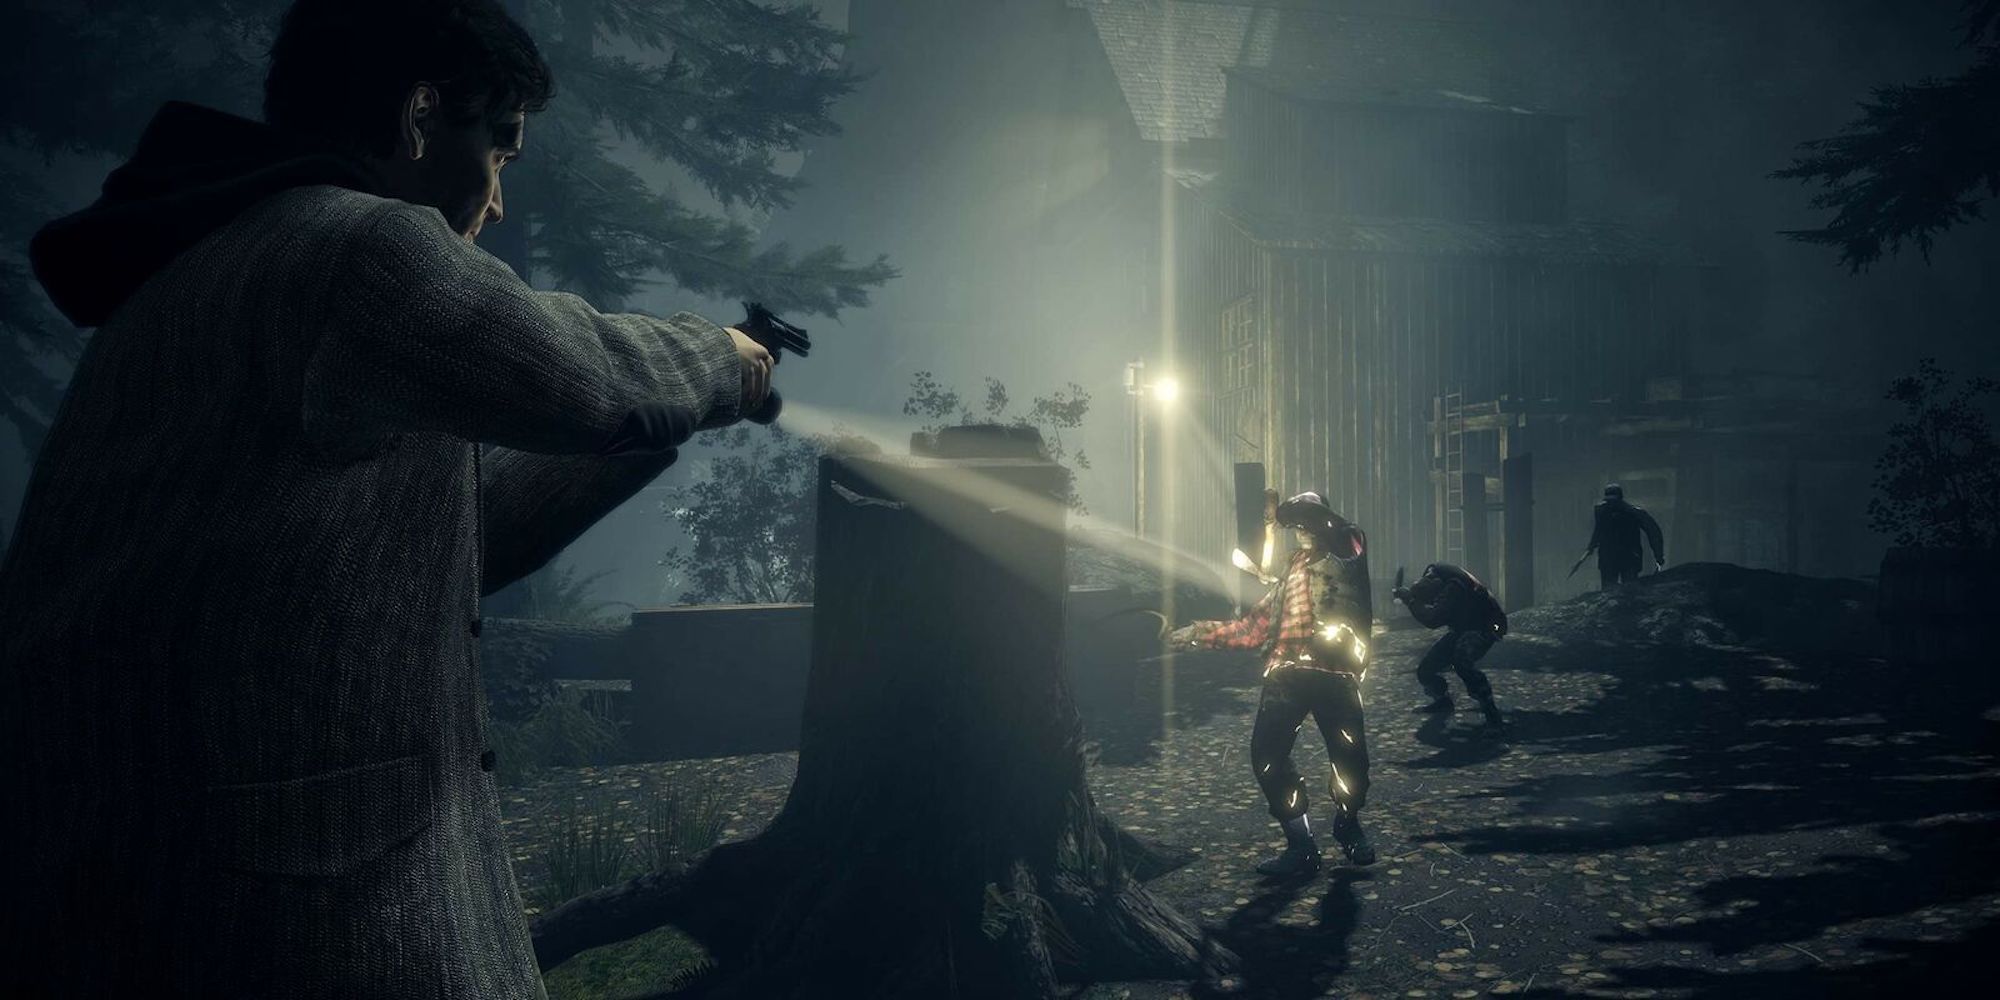 Alan Wake 2 takes creepy Control feature “way further” than before